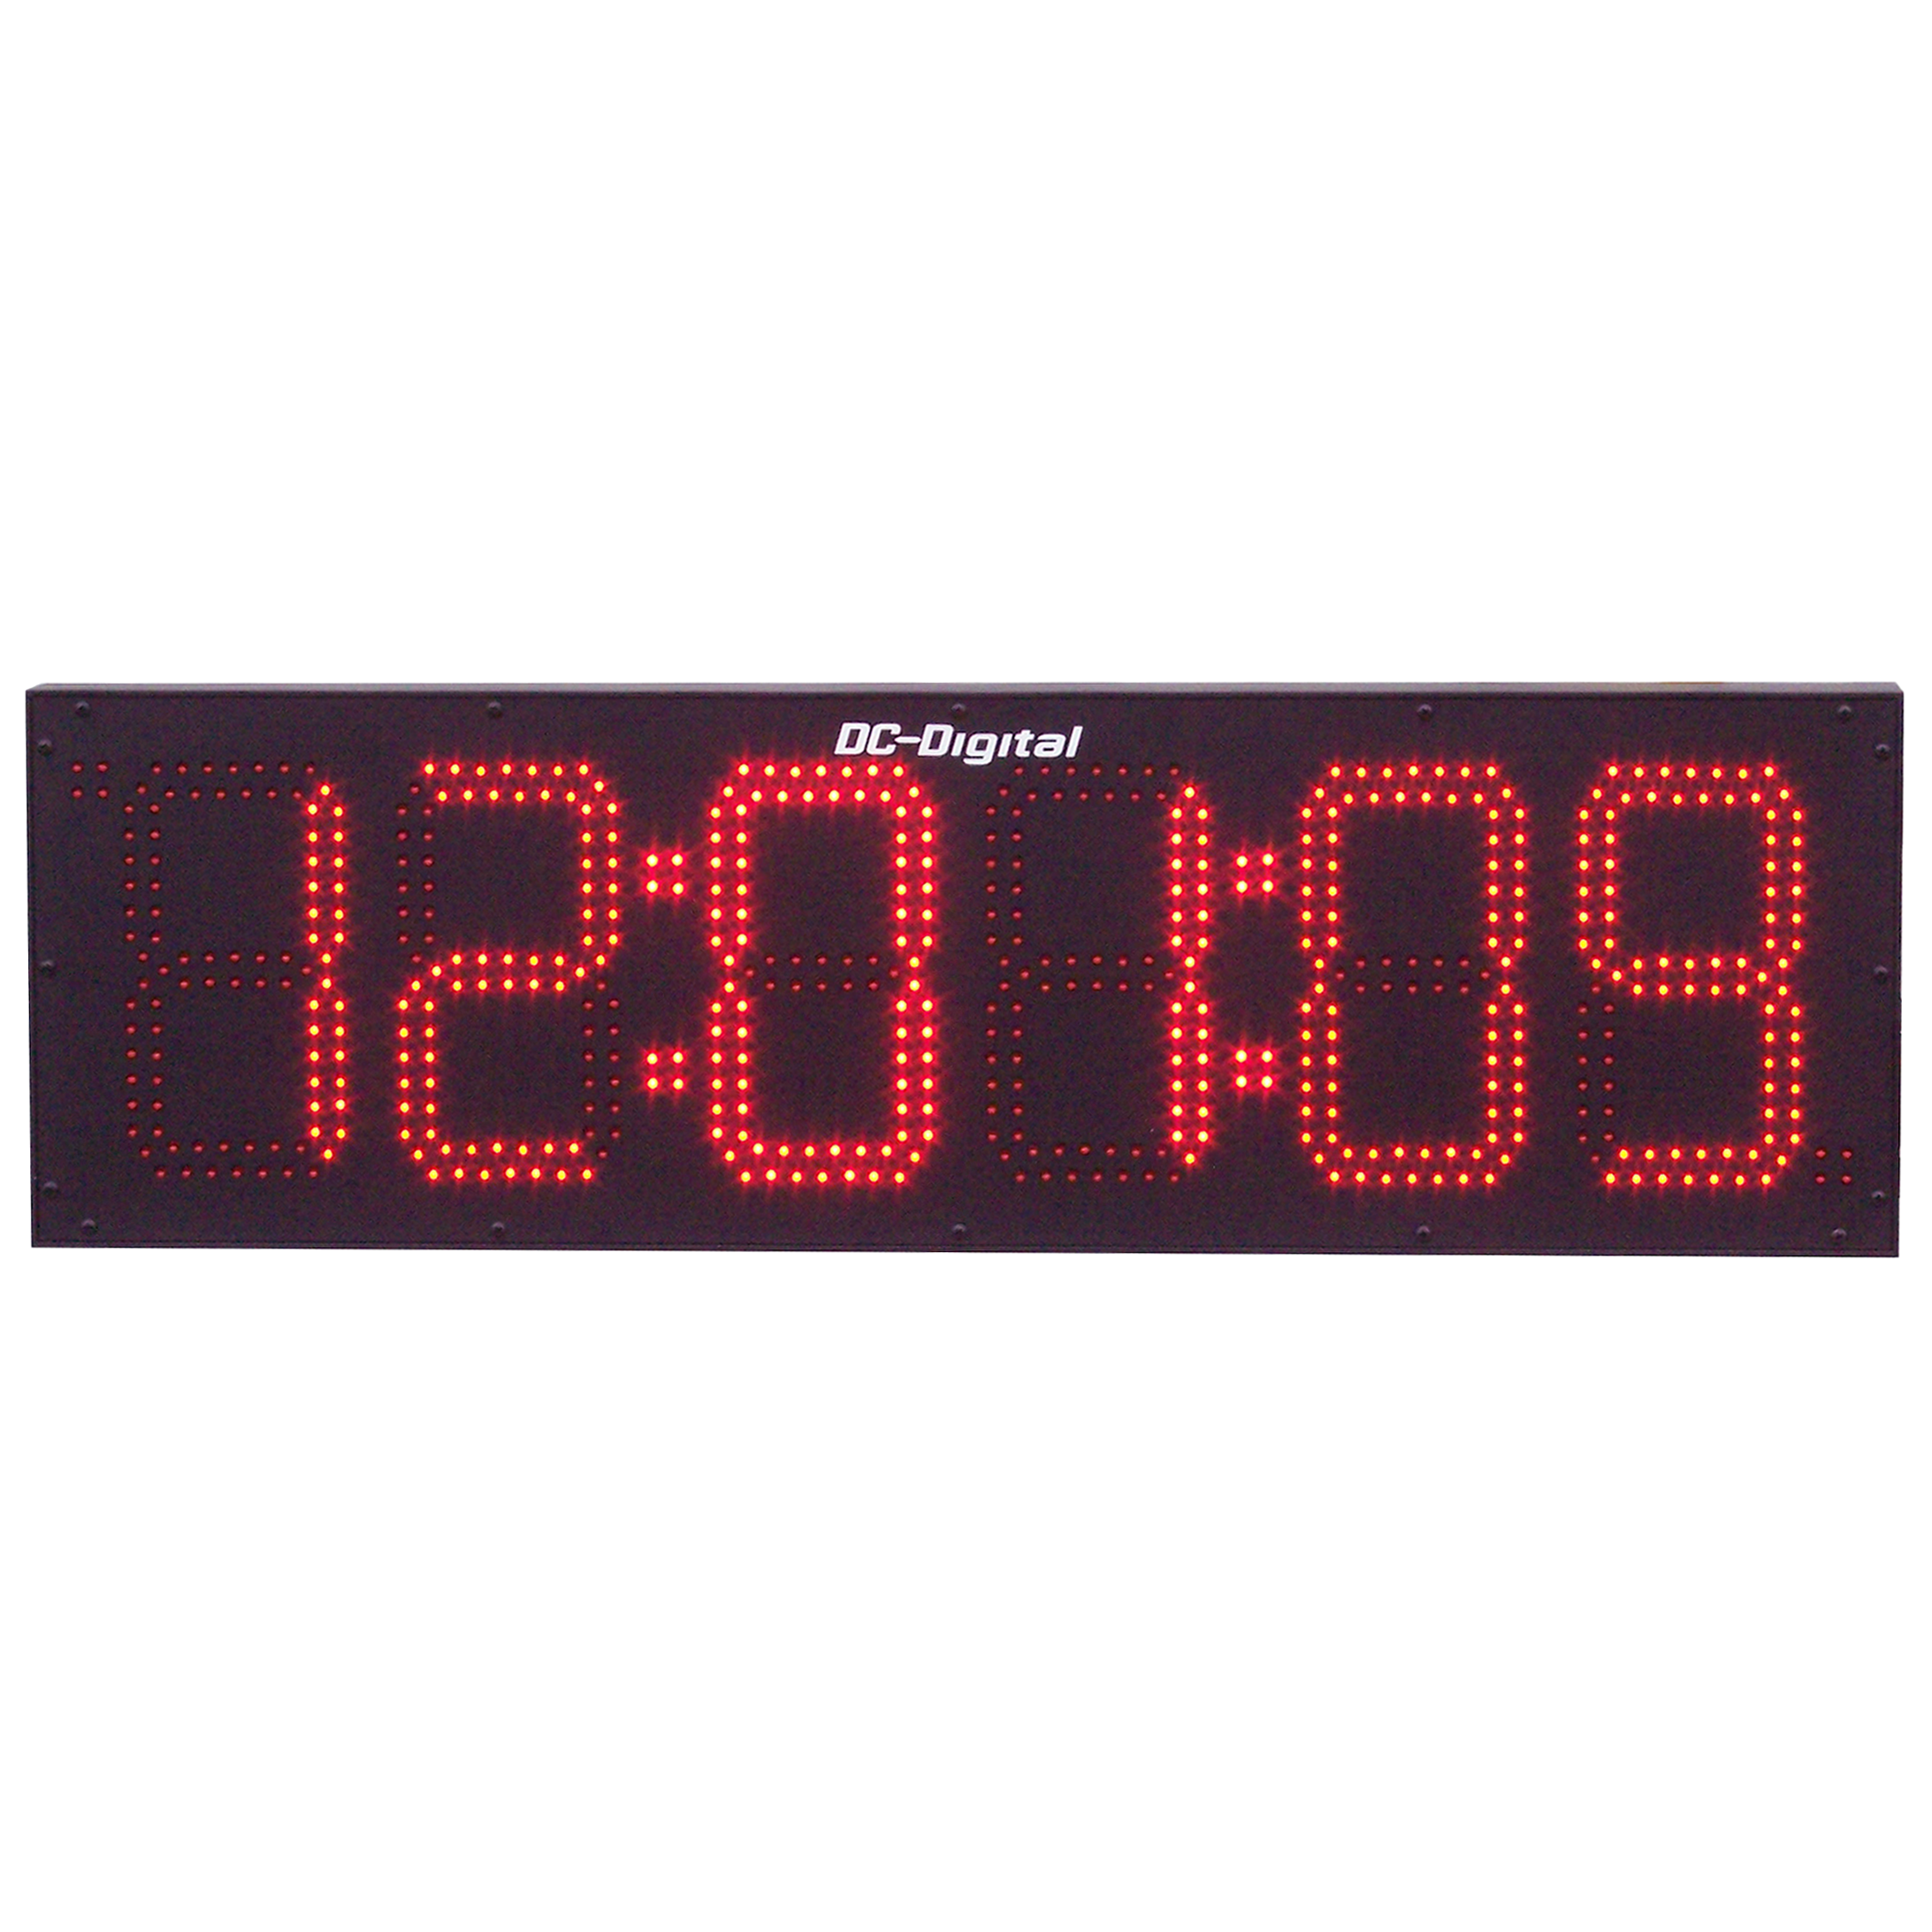 (DC-806N) 8.0 Inch LED, 6 Digit, Network NTP Server Synchronized, Web Page Configurable, Atomic Digital Time of Day Clock (OUTDOOR)